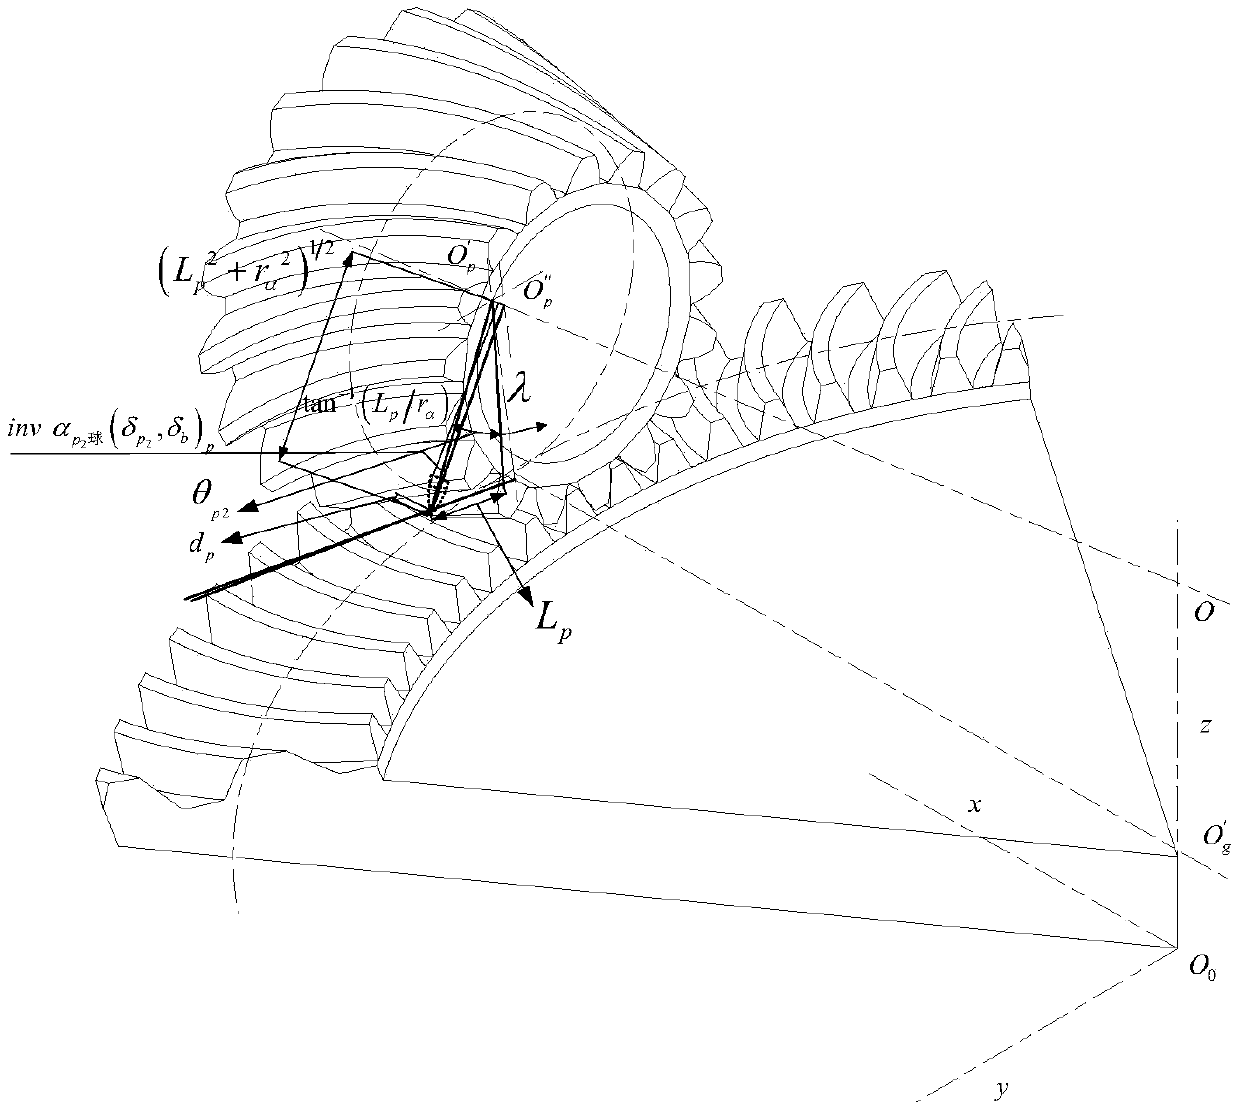 A method for optimizing the layout of oil injection lubrication nozzles ofa helical bevel gear for an aerospace